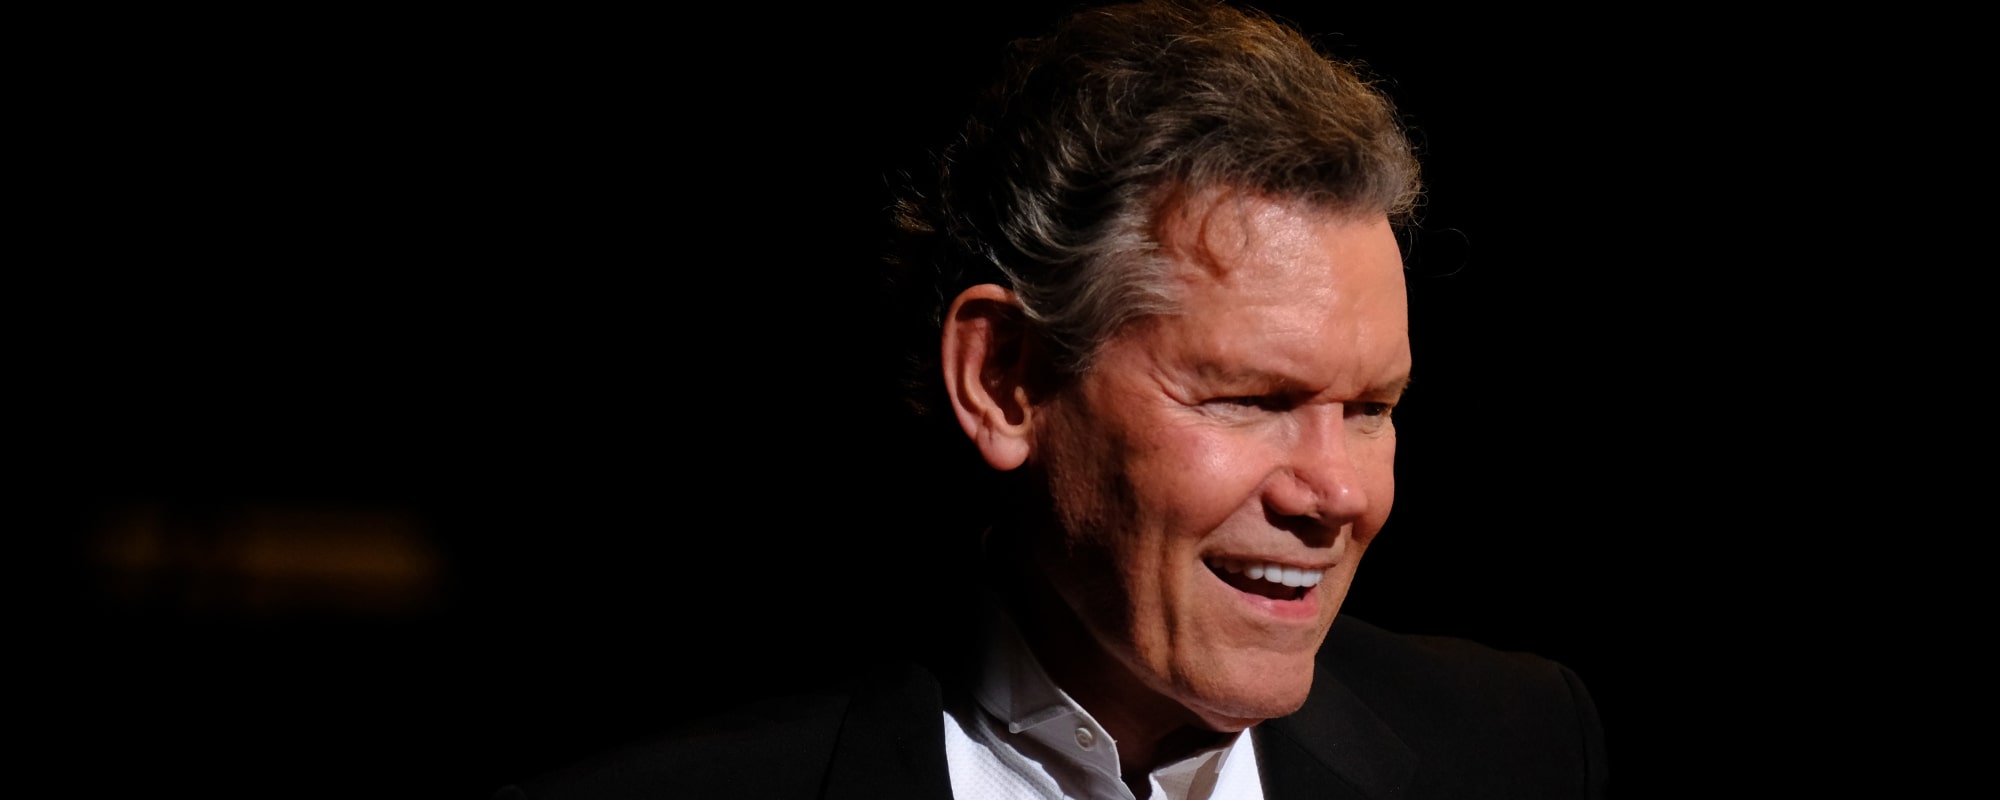 Randy Travis Thanks Lainey Wilson for the “Honor” of Sharing a Stage with Her